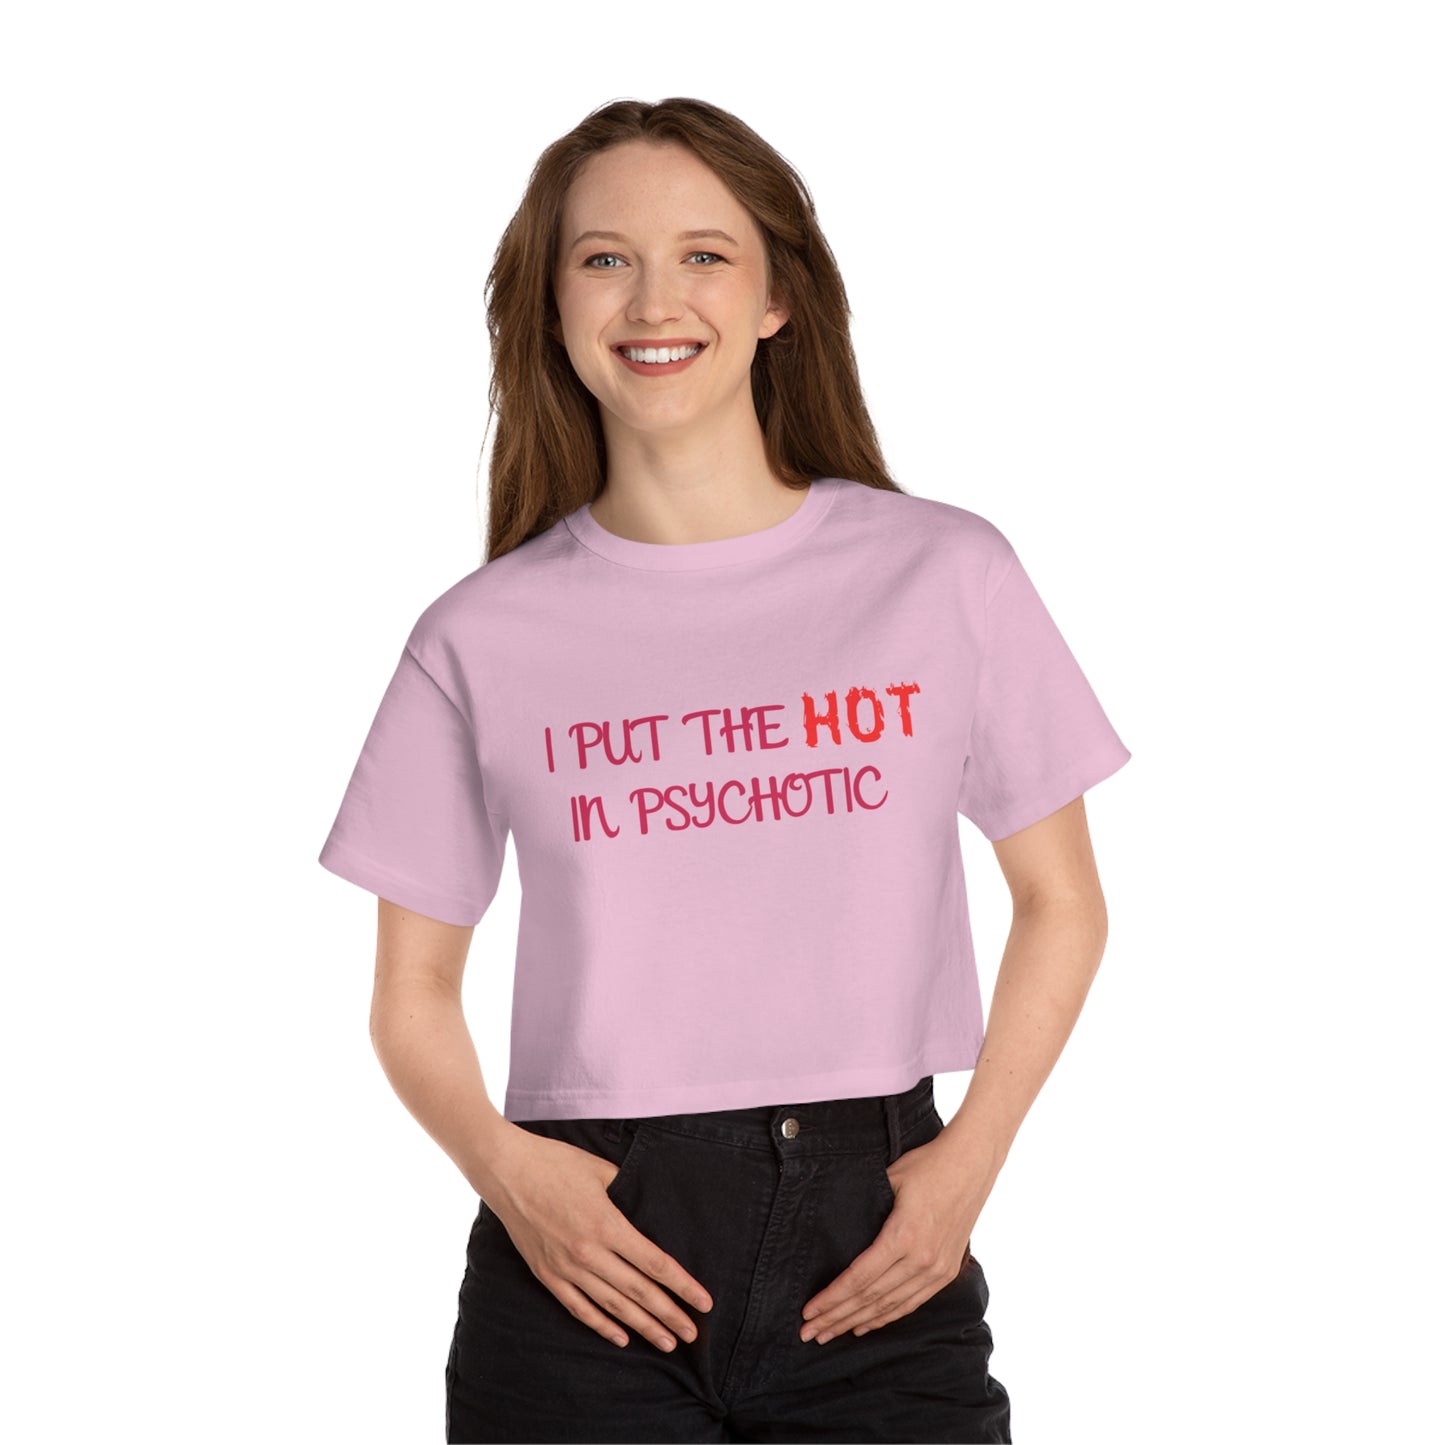 "I put the HOT in Psychotic" - Champion Crop Top